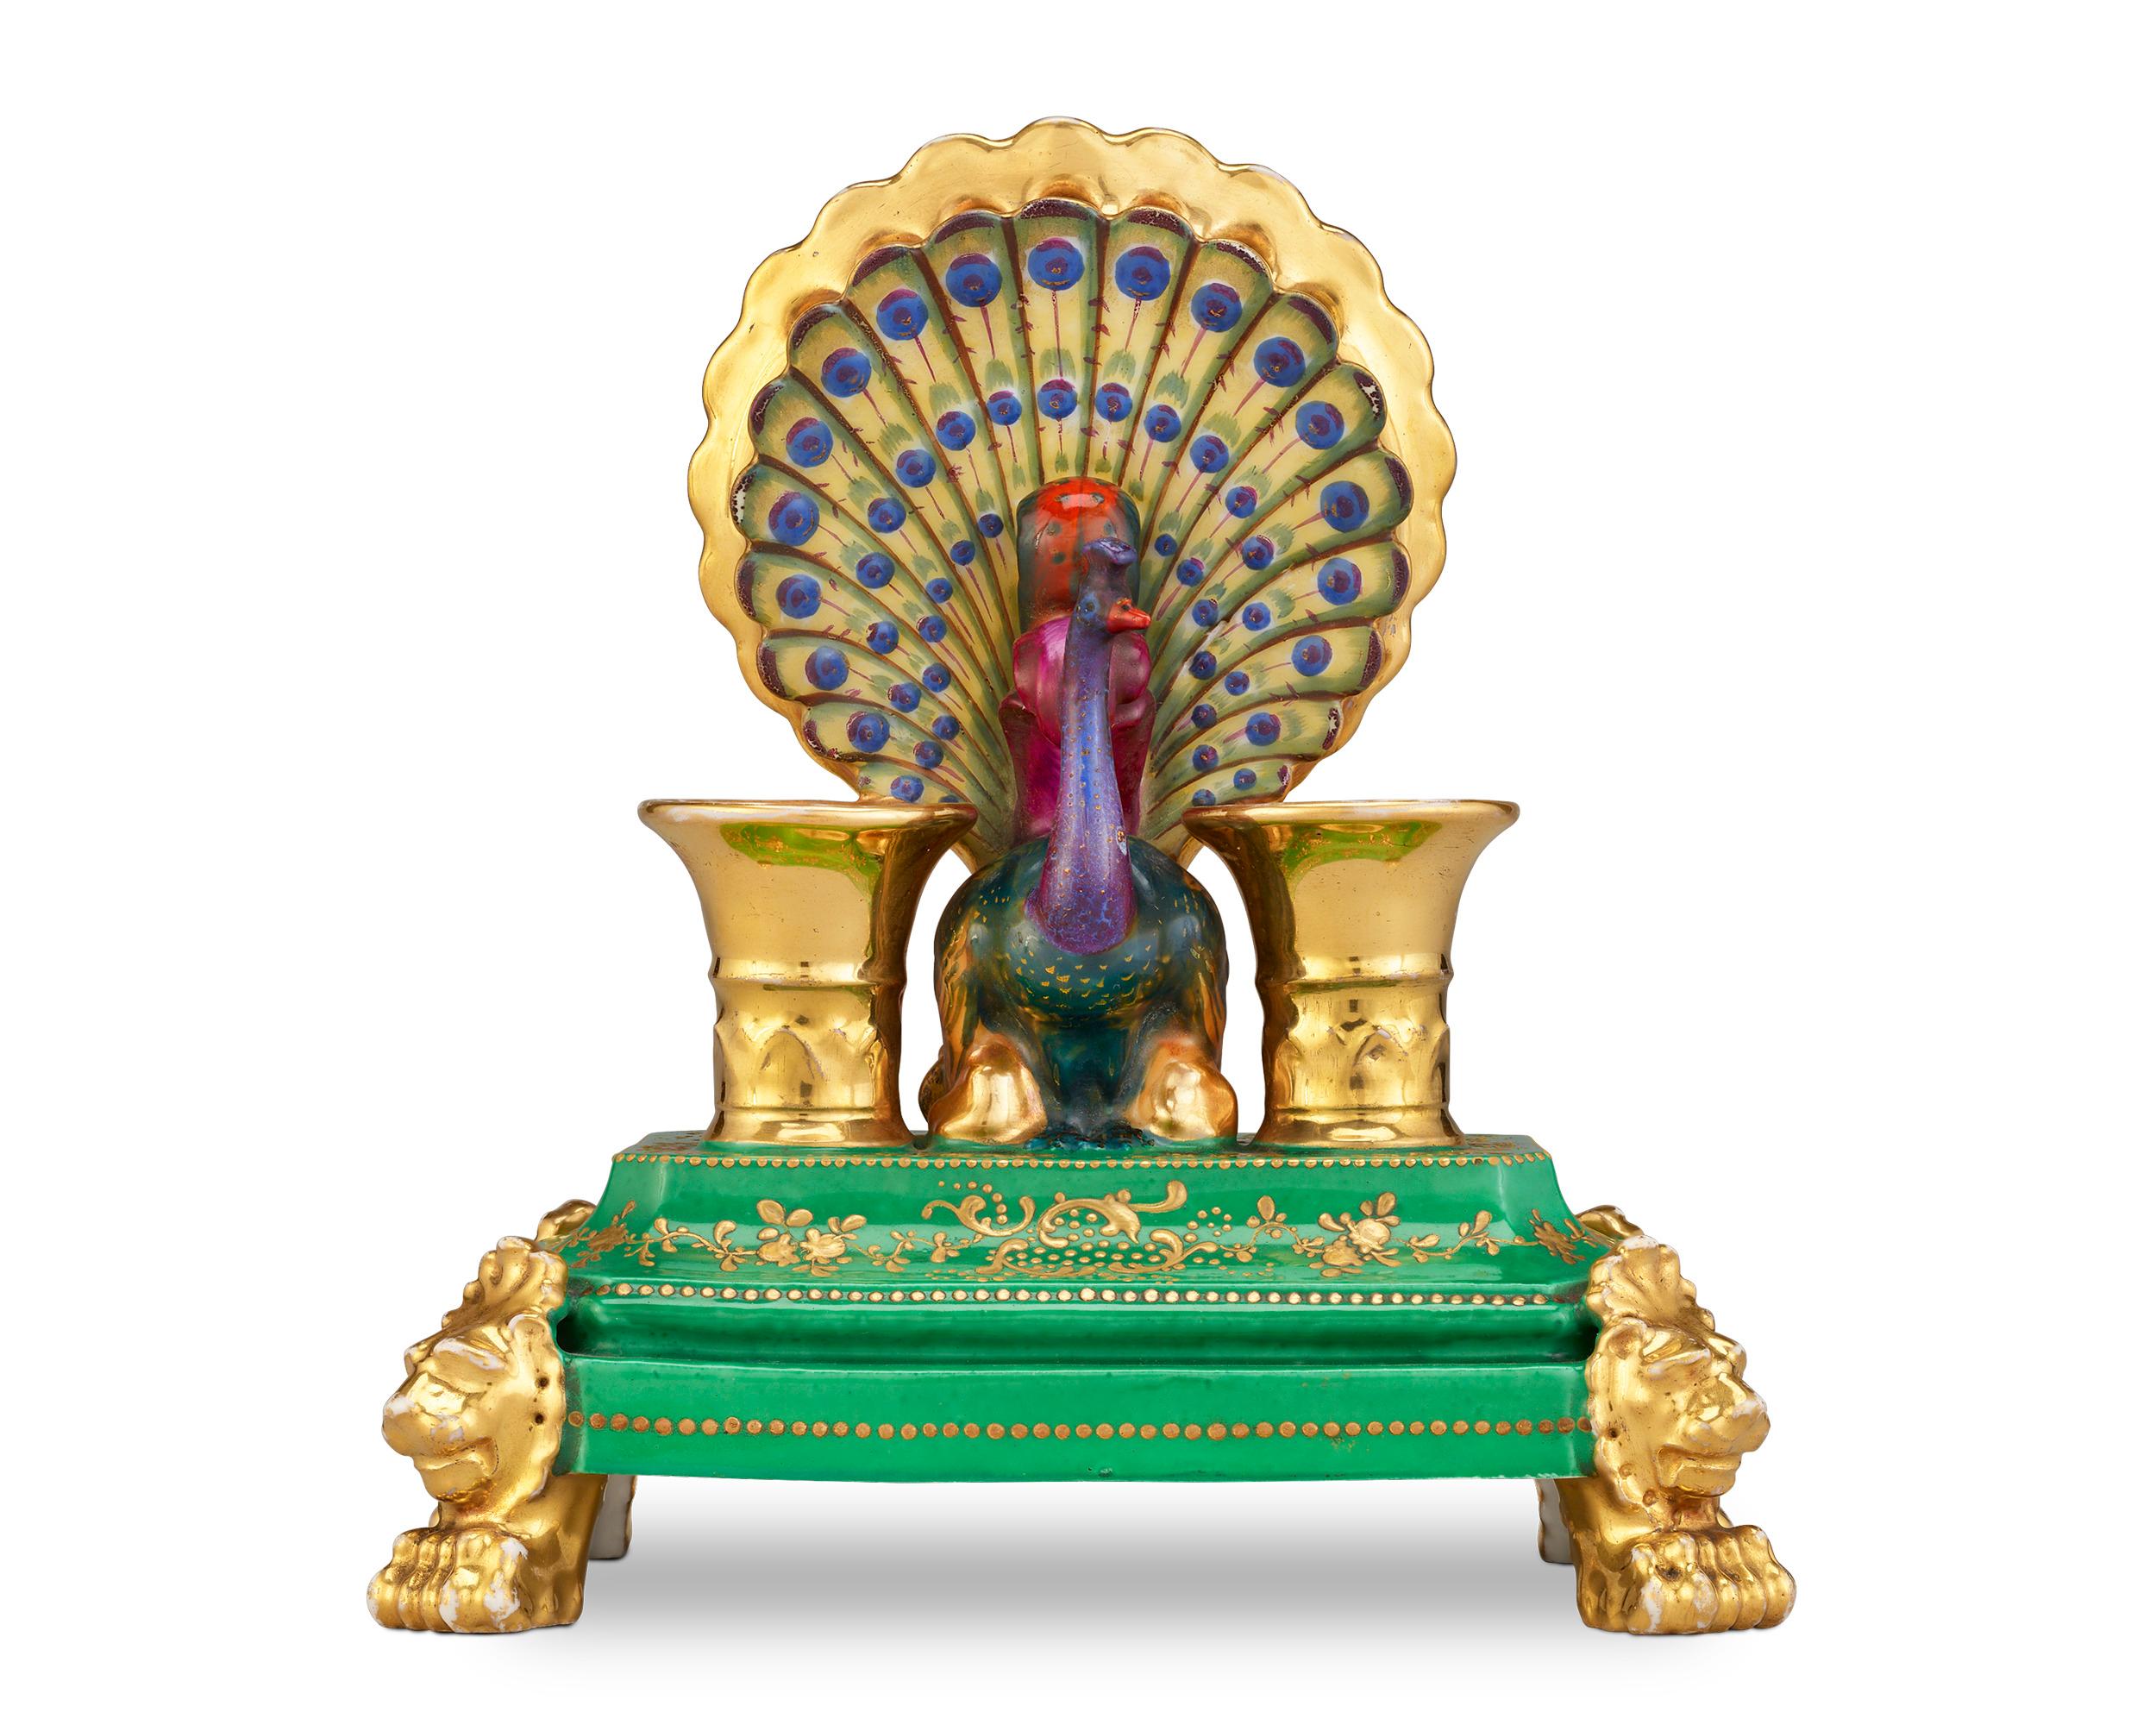 This candle holder by renowned porcelain manufacturer Jacob Petit is extravagantly designed in the form of a majestic peacock. Petit owned one of the most important and well-known porcelain factories in France, becoming one of the major producers of